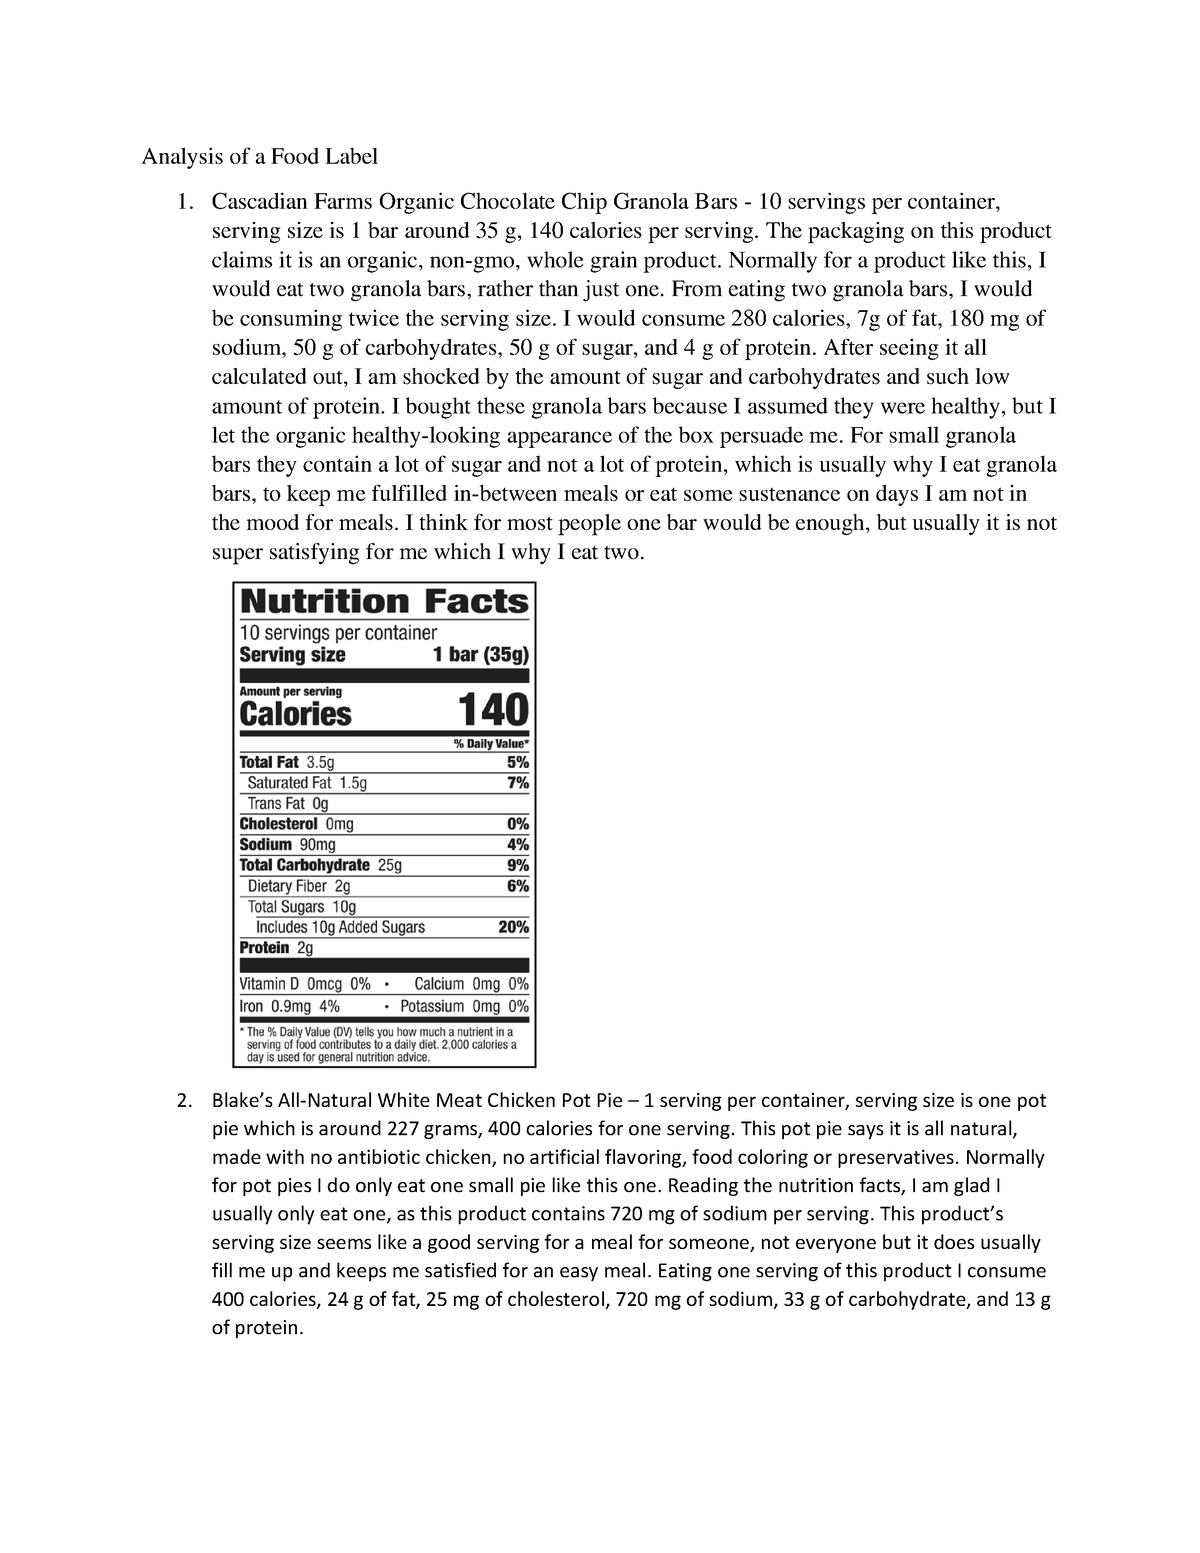 food label analysis assignment